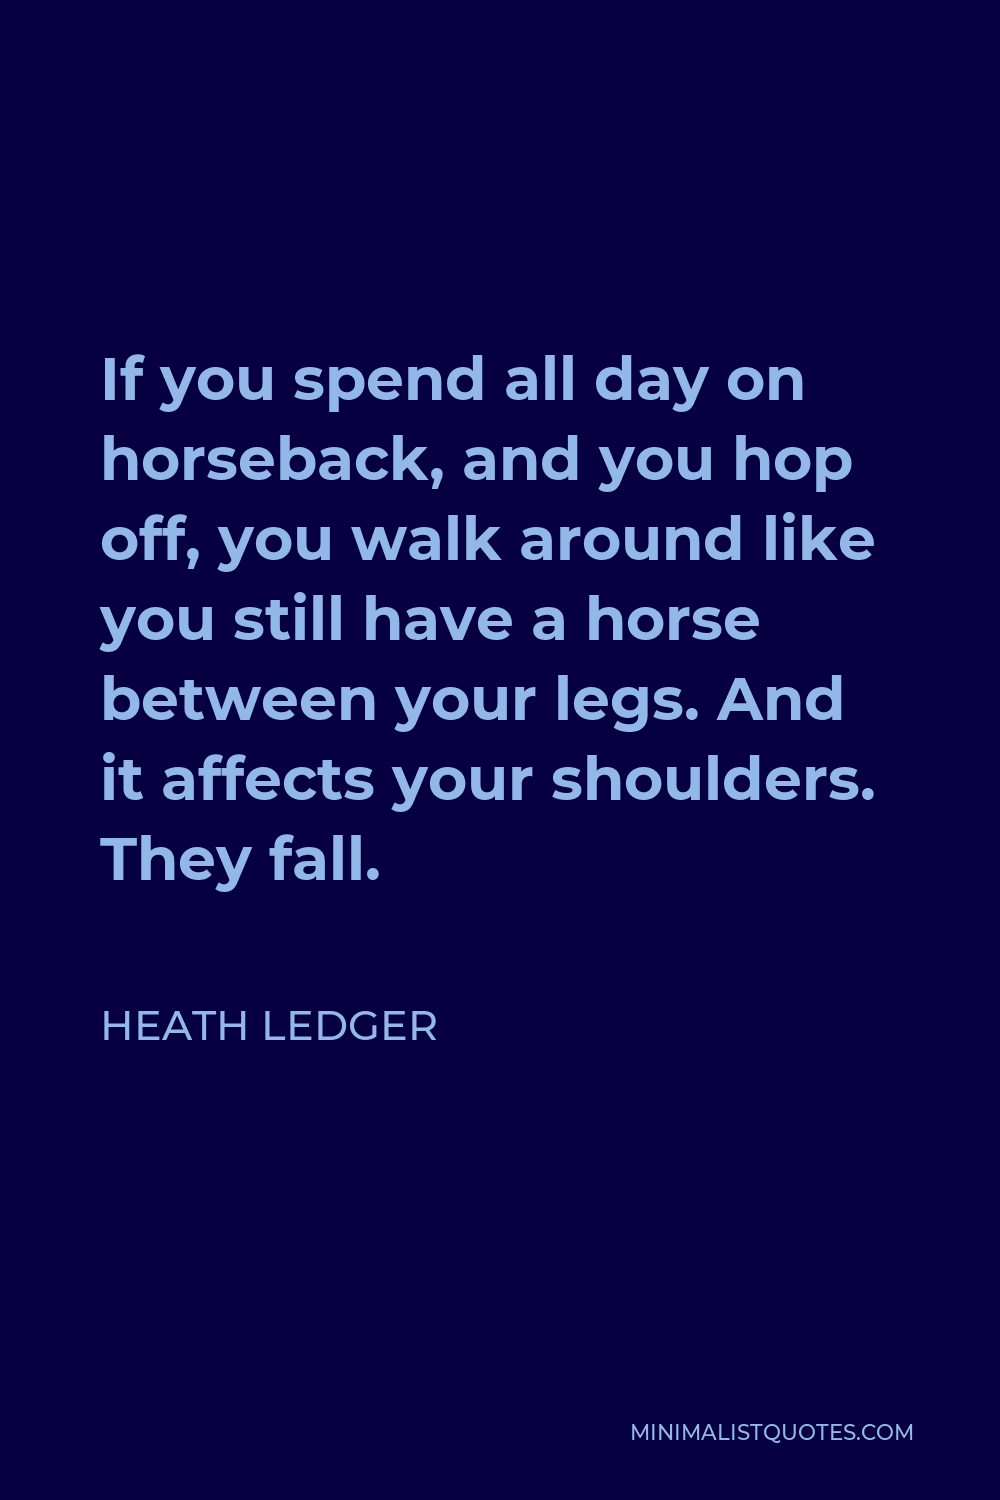 Heath Ledger Quote - If you spend all day on horseback, and you hop off, you walk around like you still have a horse between your legs. And it affects your shoulders. They fall.